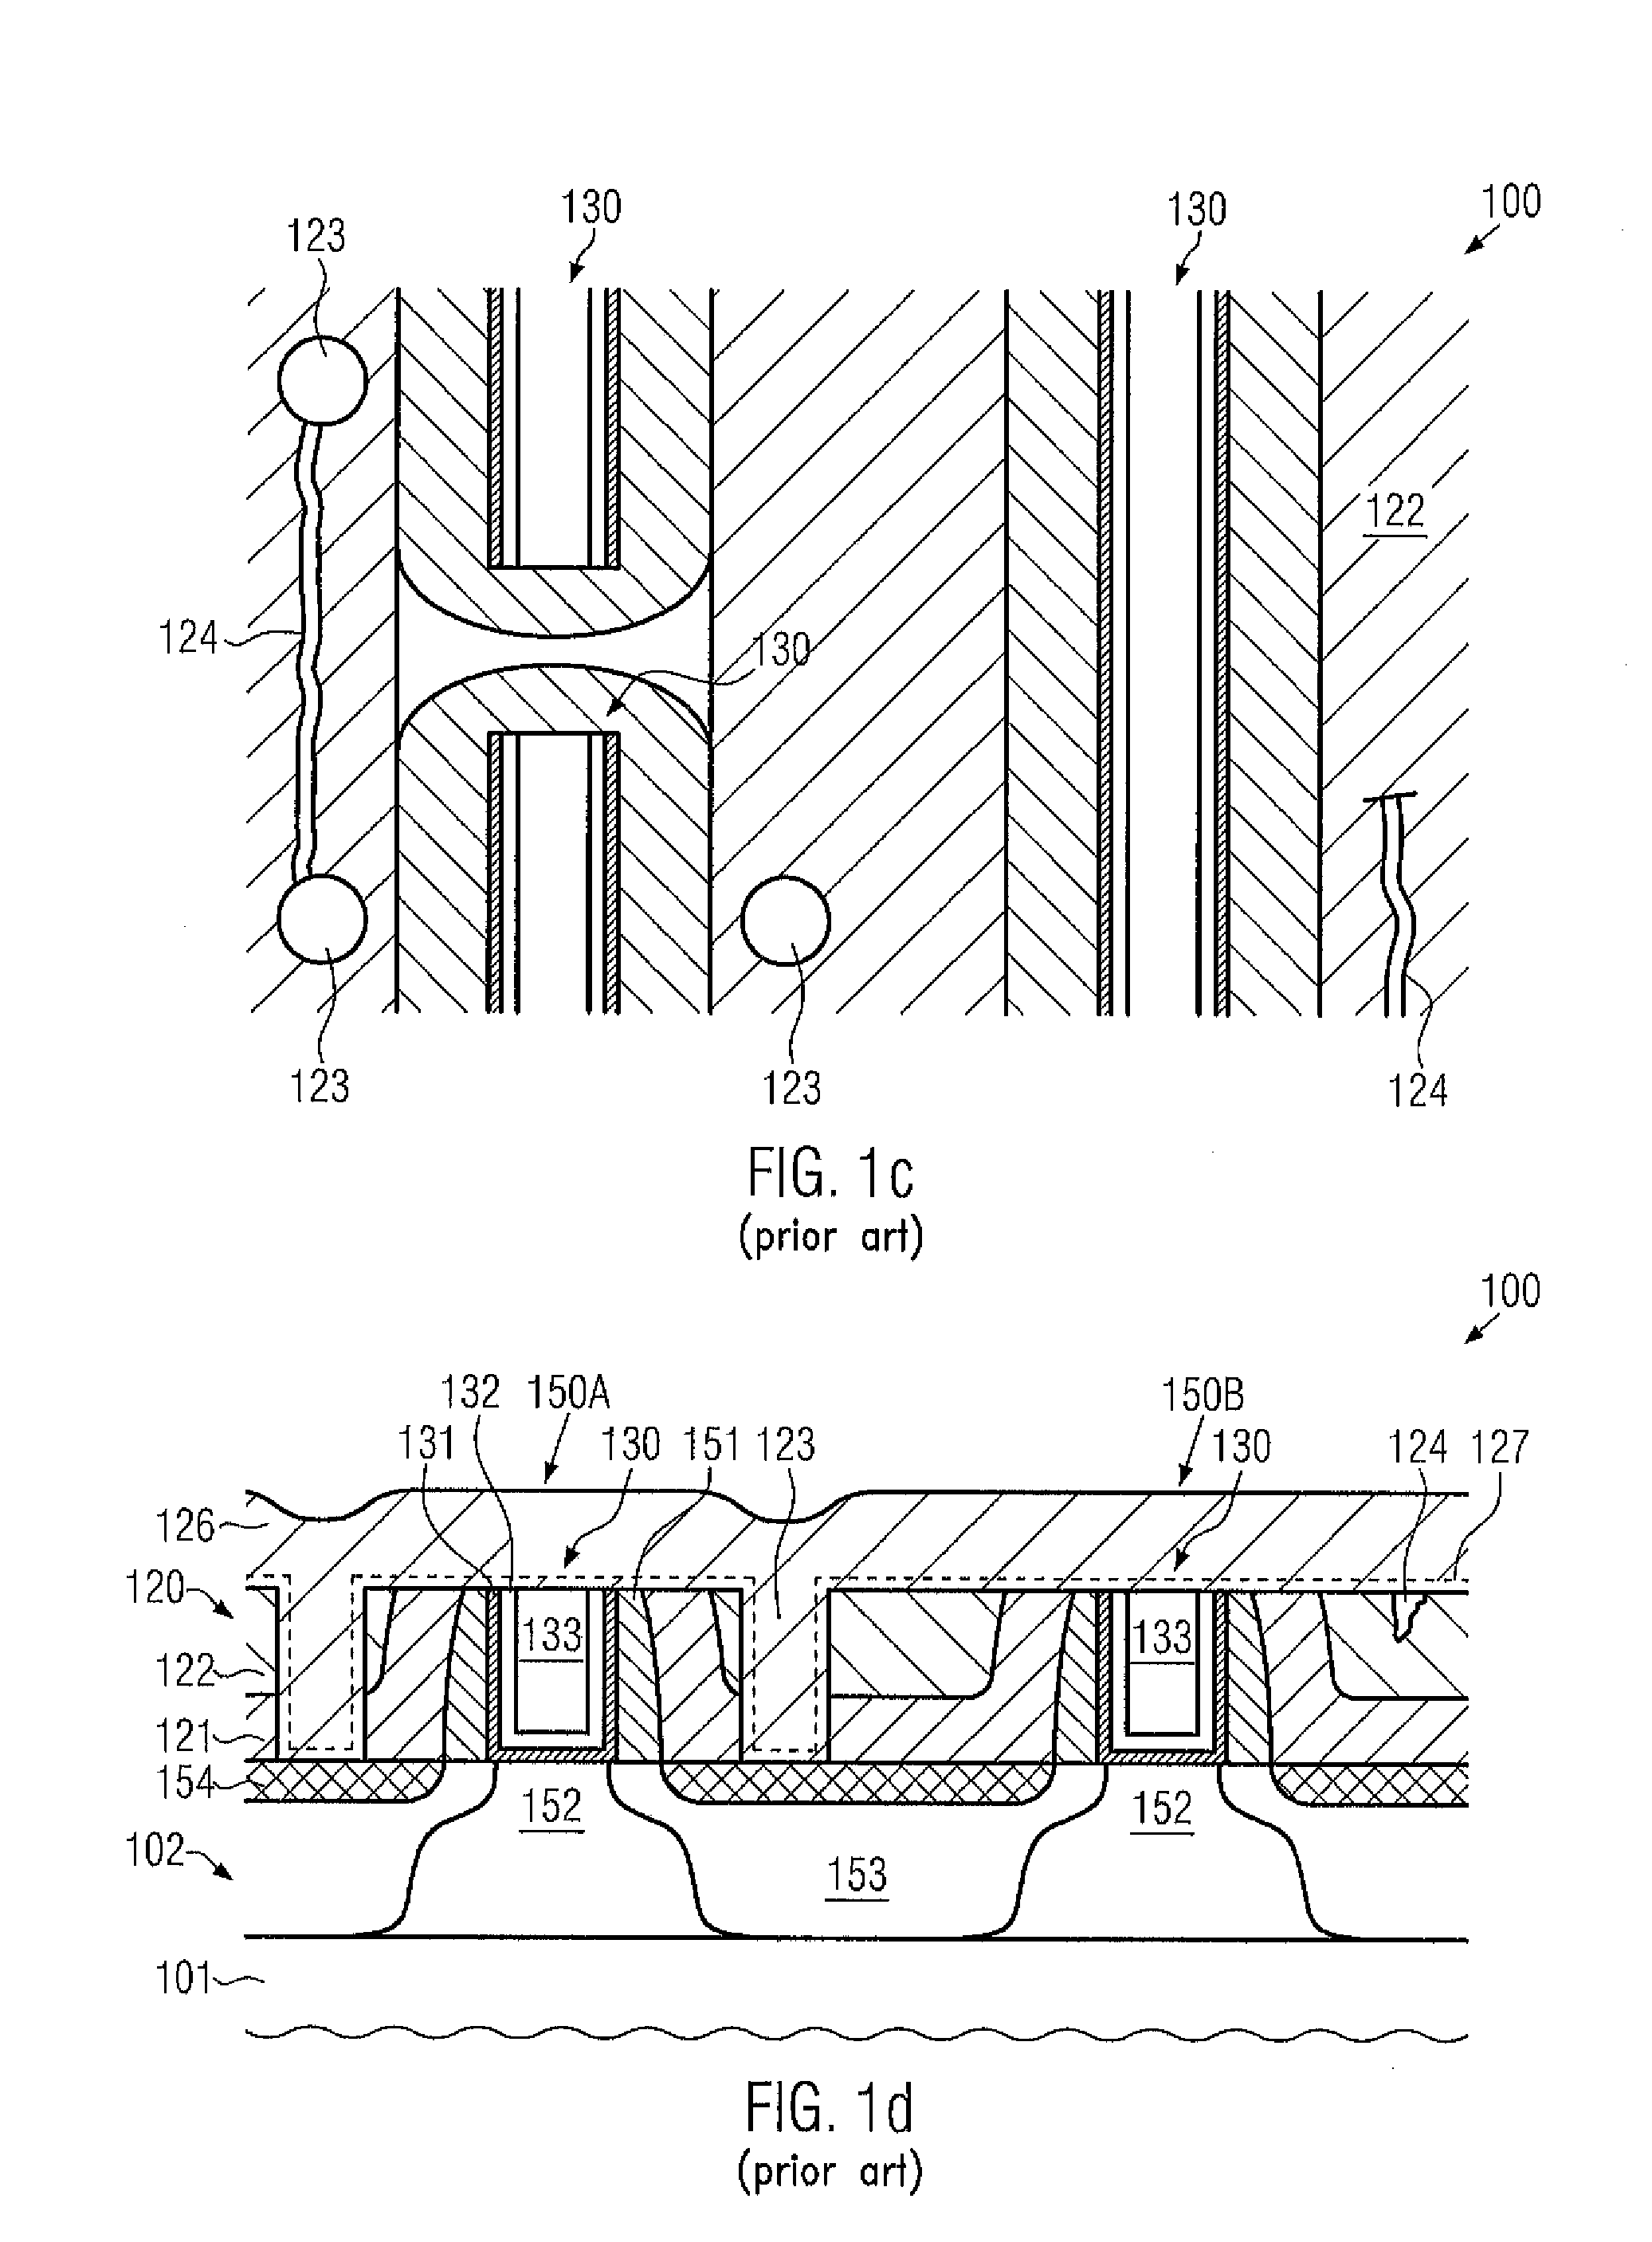 Reduced Defectivity in Contacts of a Semiconductor Device Comprising Replacement Gate Electrode Structures by Using an Intermediate Cap Layer